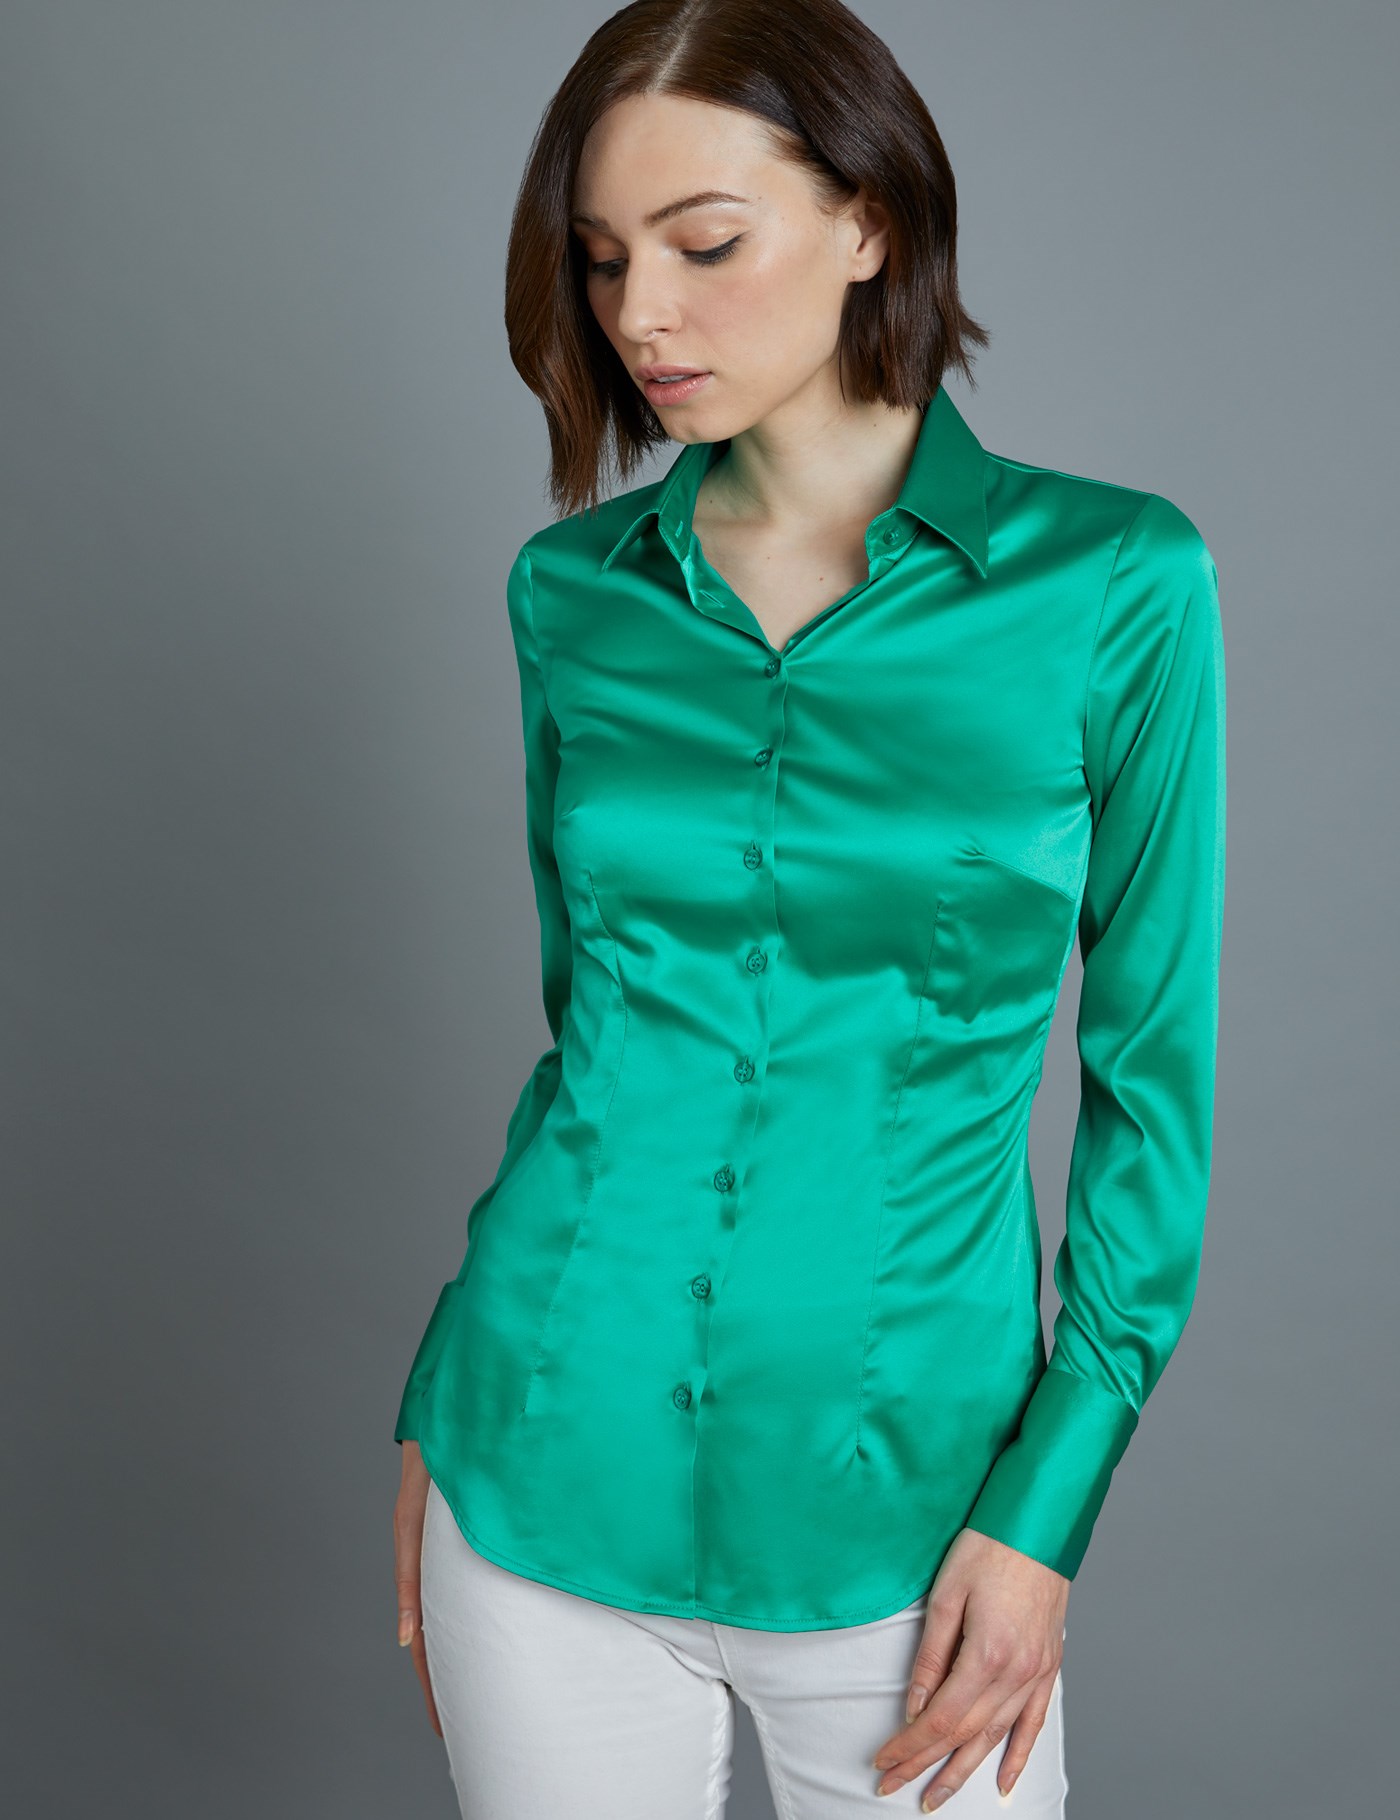 Women S Green Fitted Satin Shirt Single Cuff Hawes And Curtis